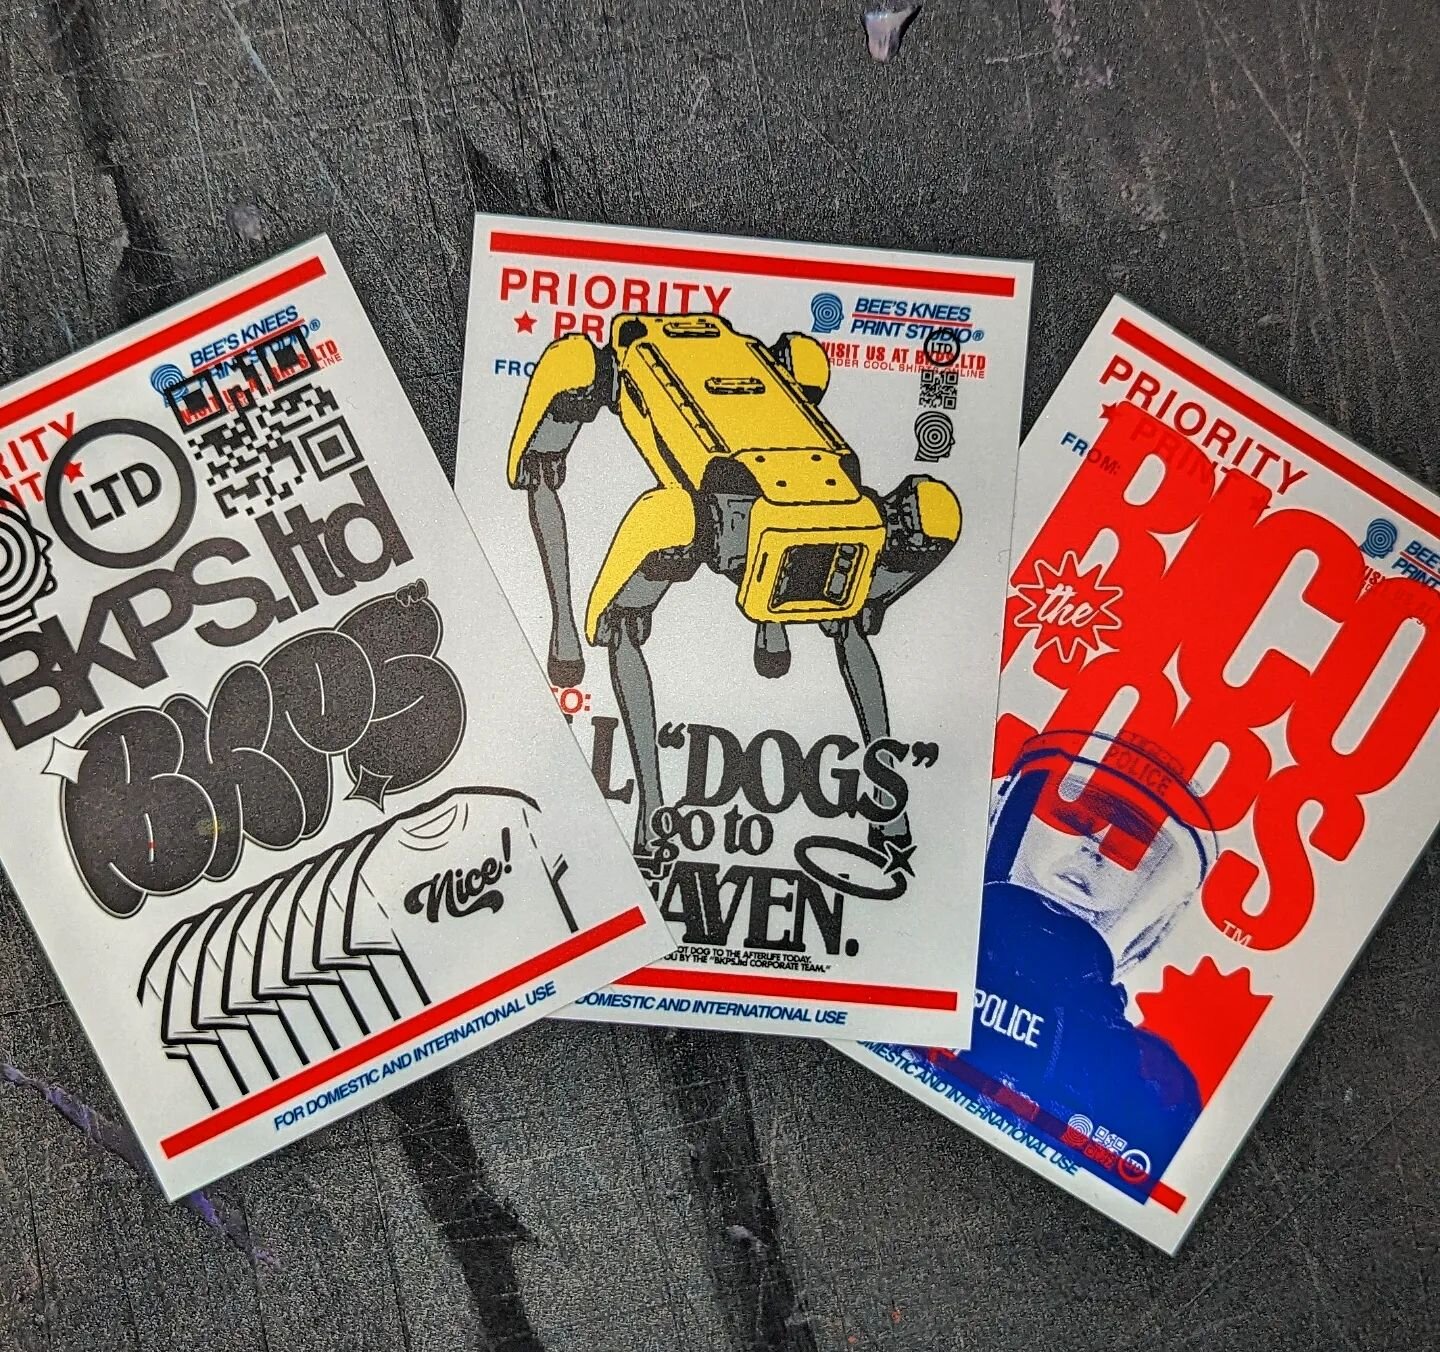 BKPS.ltd CORPORATE STICKER PACKS AVAILABLE MIDNIGHT 12.11.23  AT BKPS.ltd.
BKPS.ltd CORPORATE and the BKPS.ltd ART DEPARTMENT appreciate your support.

EDITION OF 60 NUMBERED PACKS. 45/60 INCLUDE EXTRA STICKERS FROM 2023.